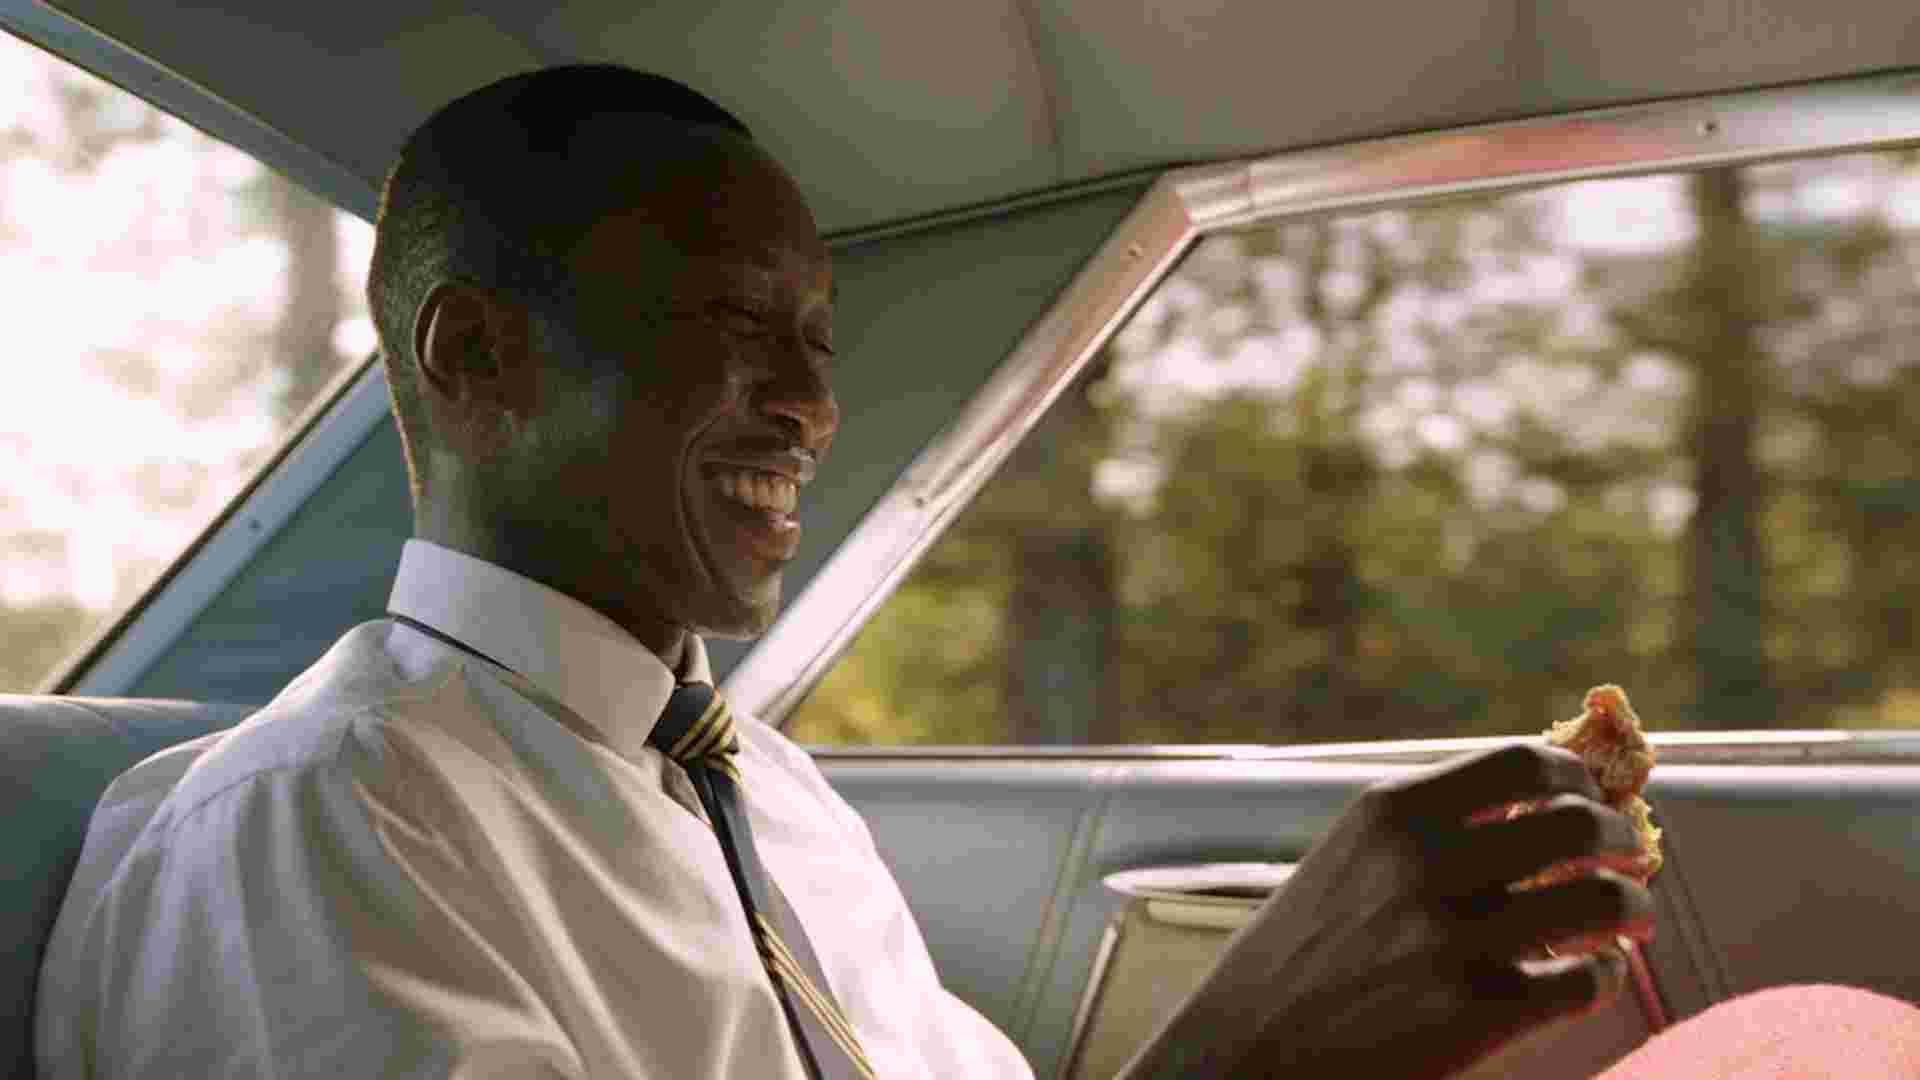 Green Book Movie Wallpapers - Wallpaper Cave